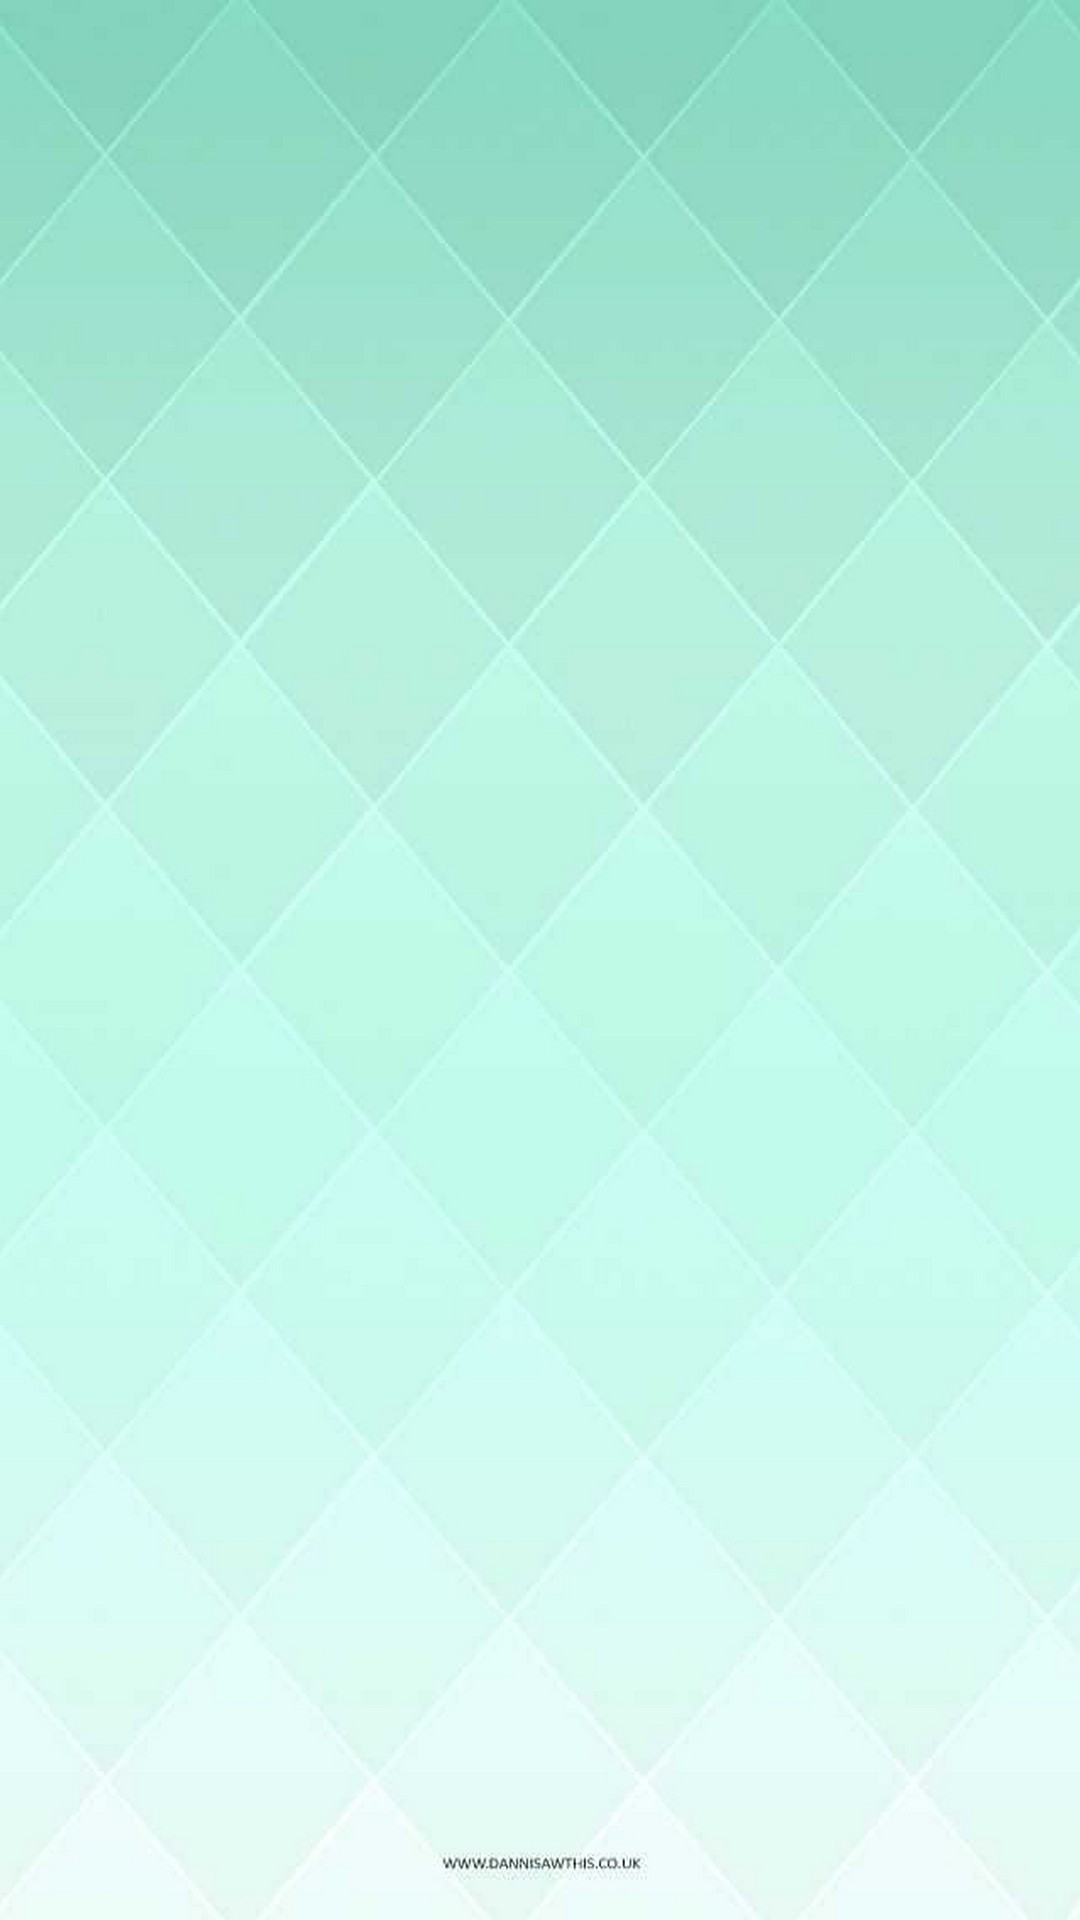 Android Wallpaper HD Mint Green with image resolution 1080x1920 pixel. You can make this wallpaper for your Android backgrounds, Tablet, Smartphones Screensavers and Mobile Phone Lock Screen